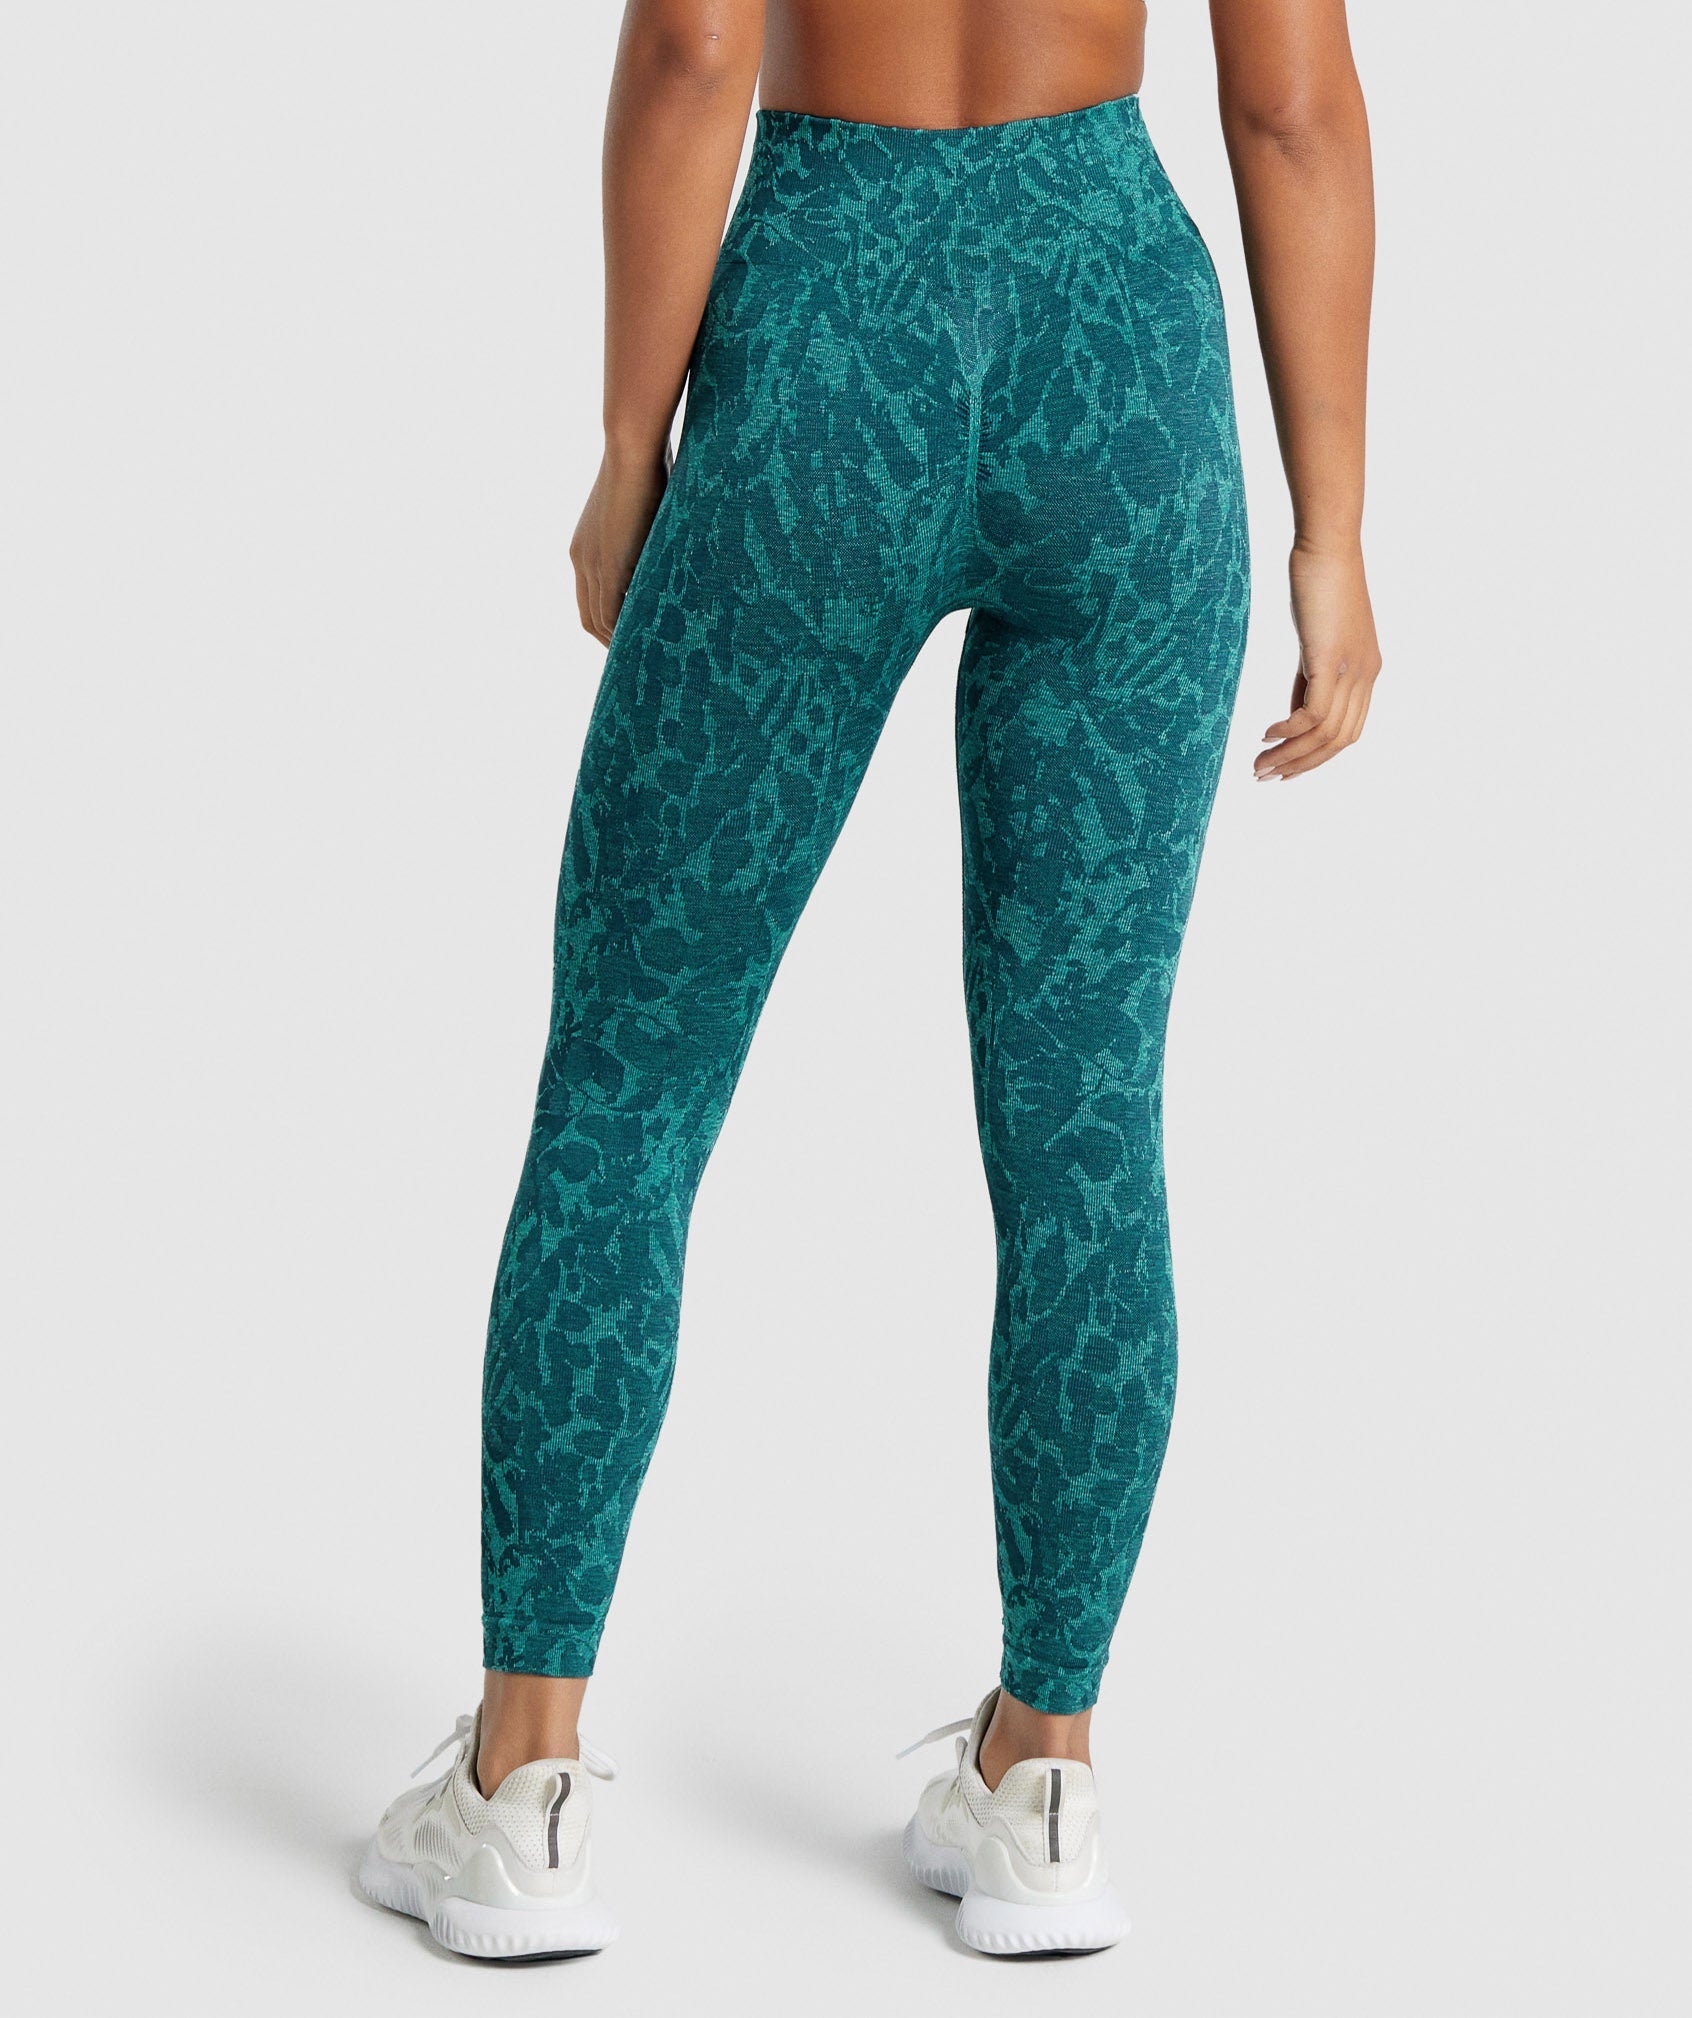 Adapt Animal Seamless Leggings in Butterfly | Teal - view 5